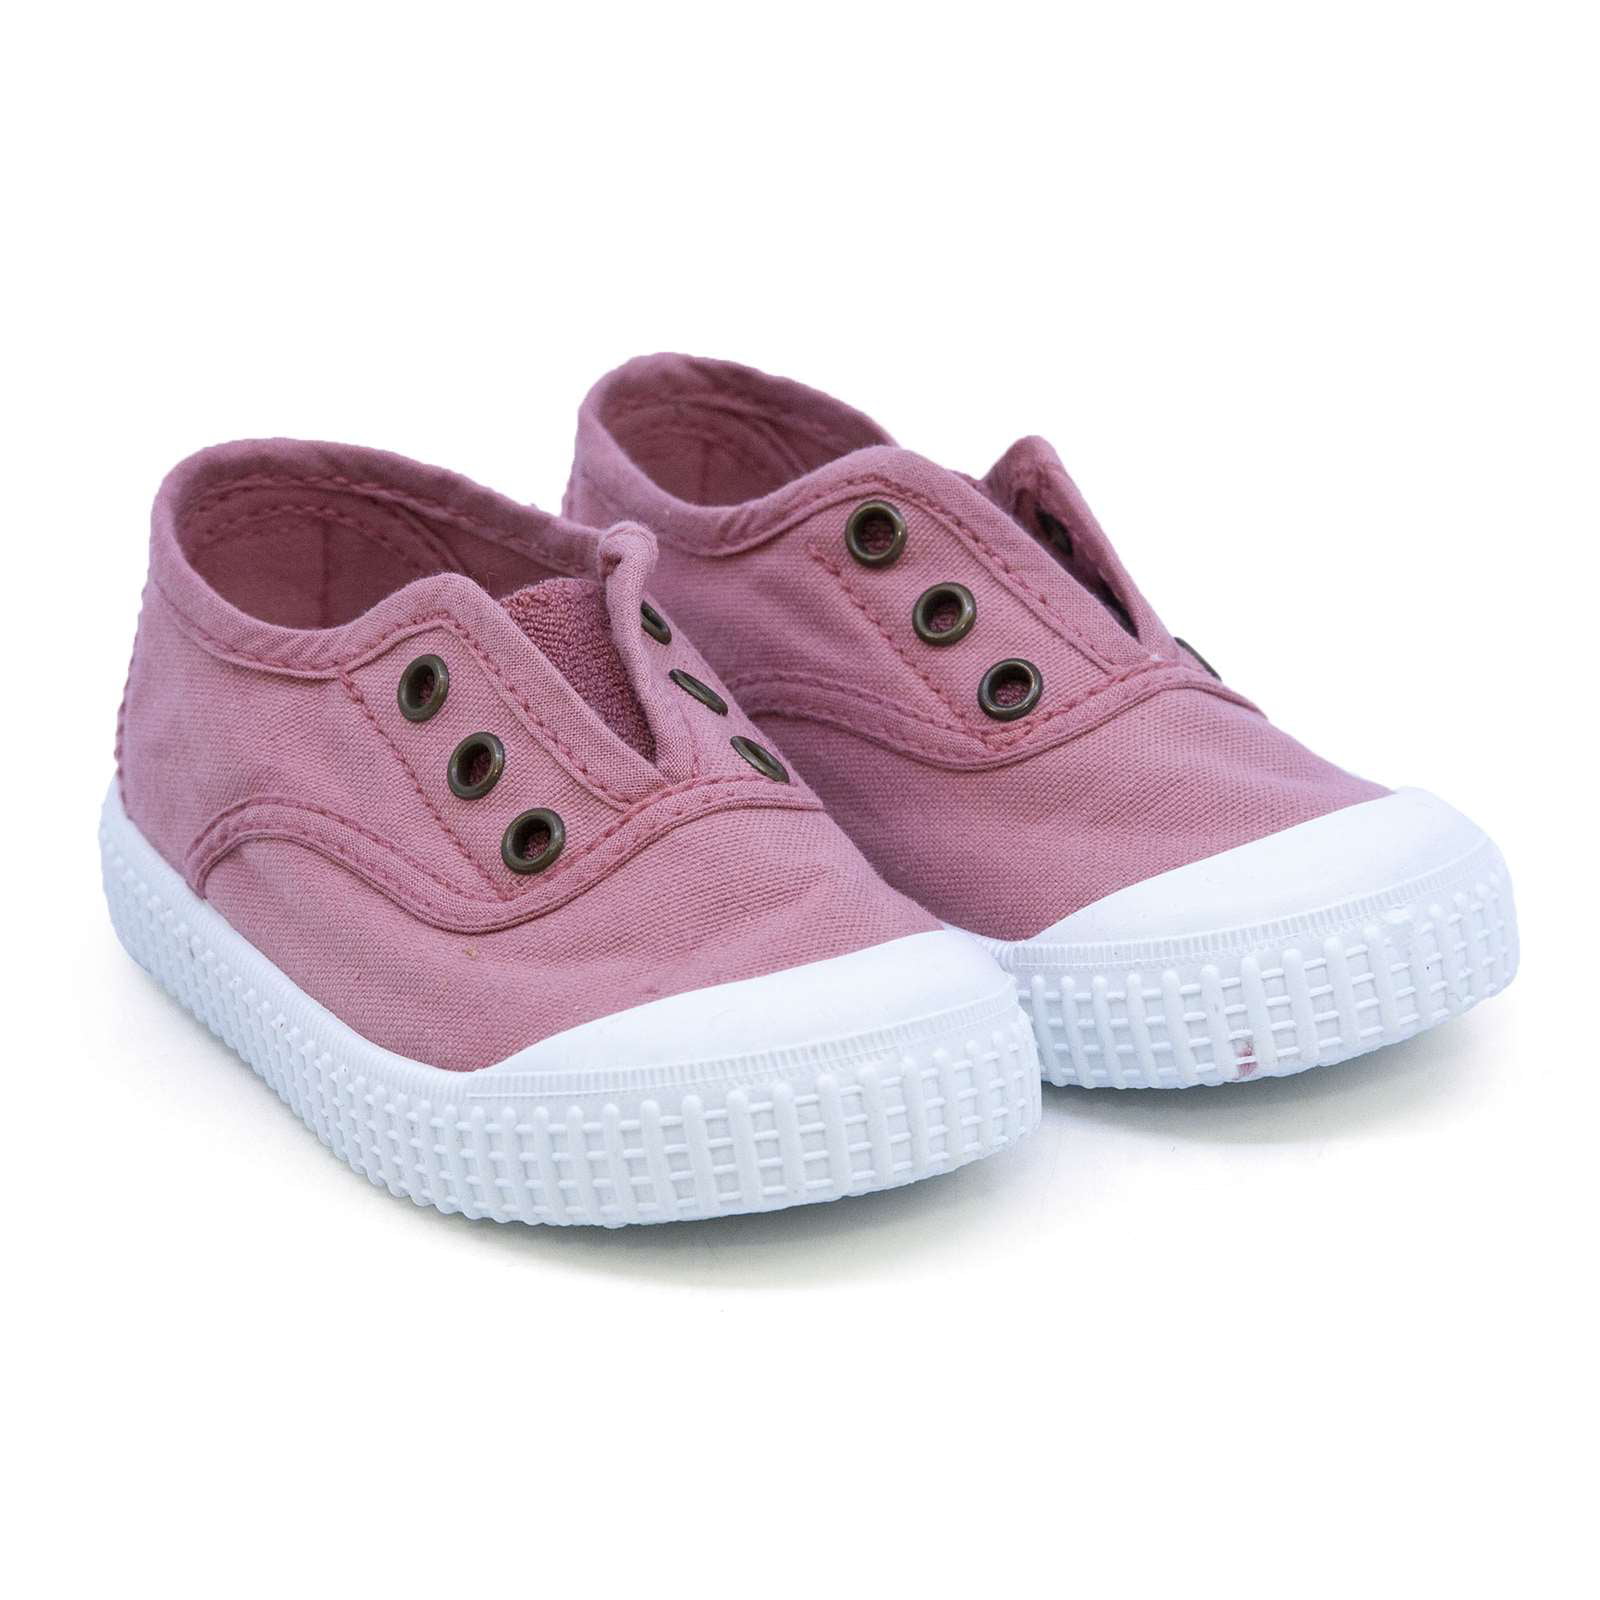 Victoria Toddlers Slip On Canvas Shoes 